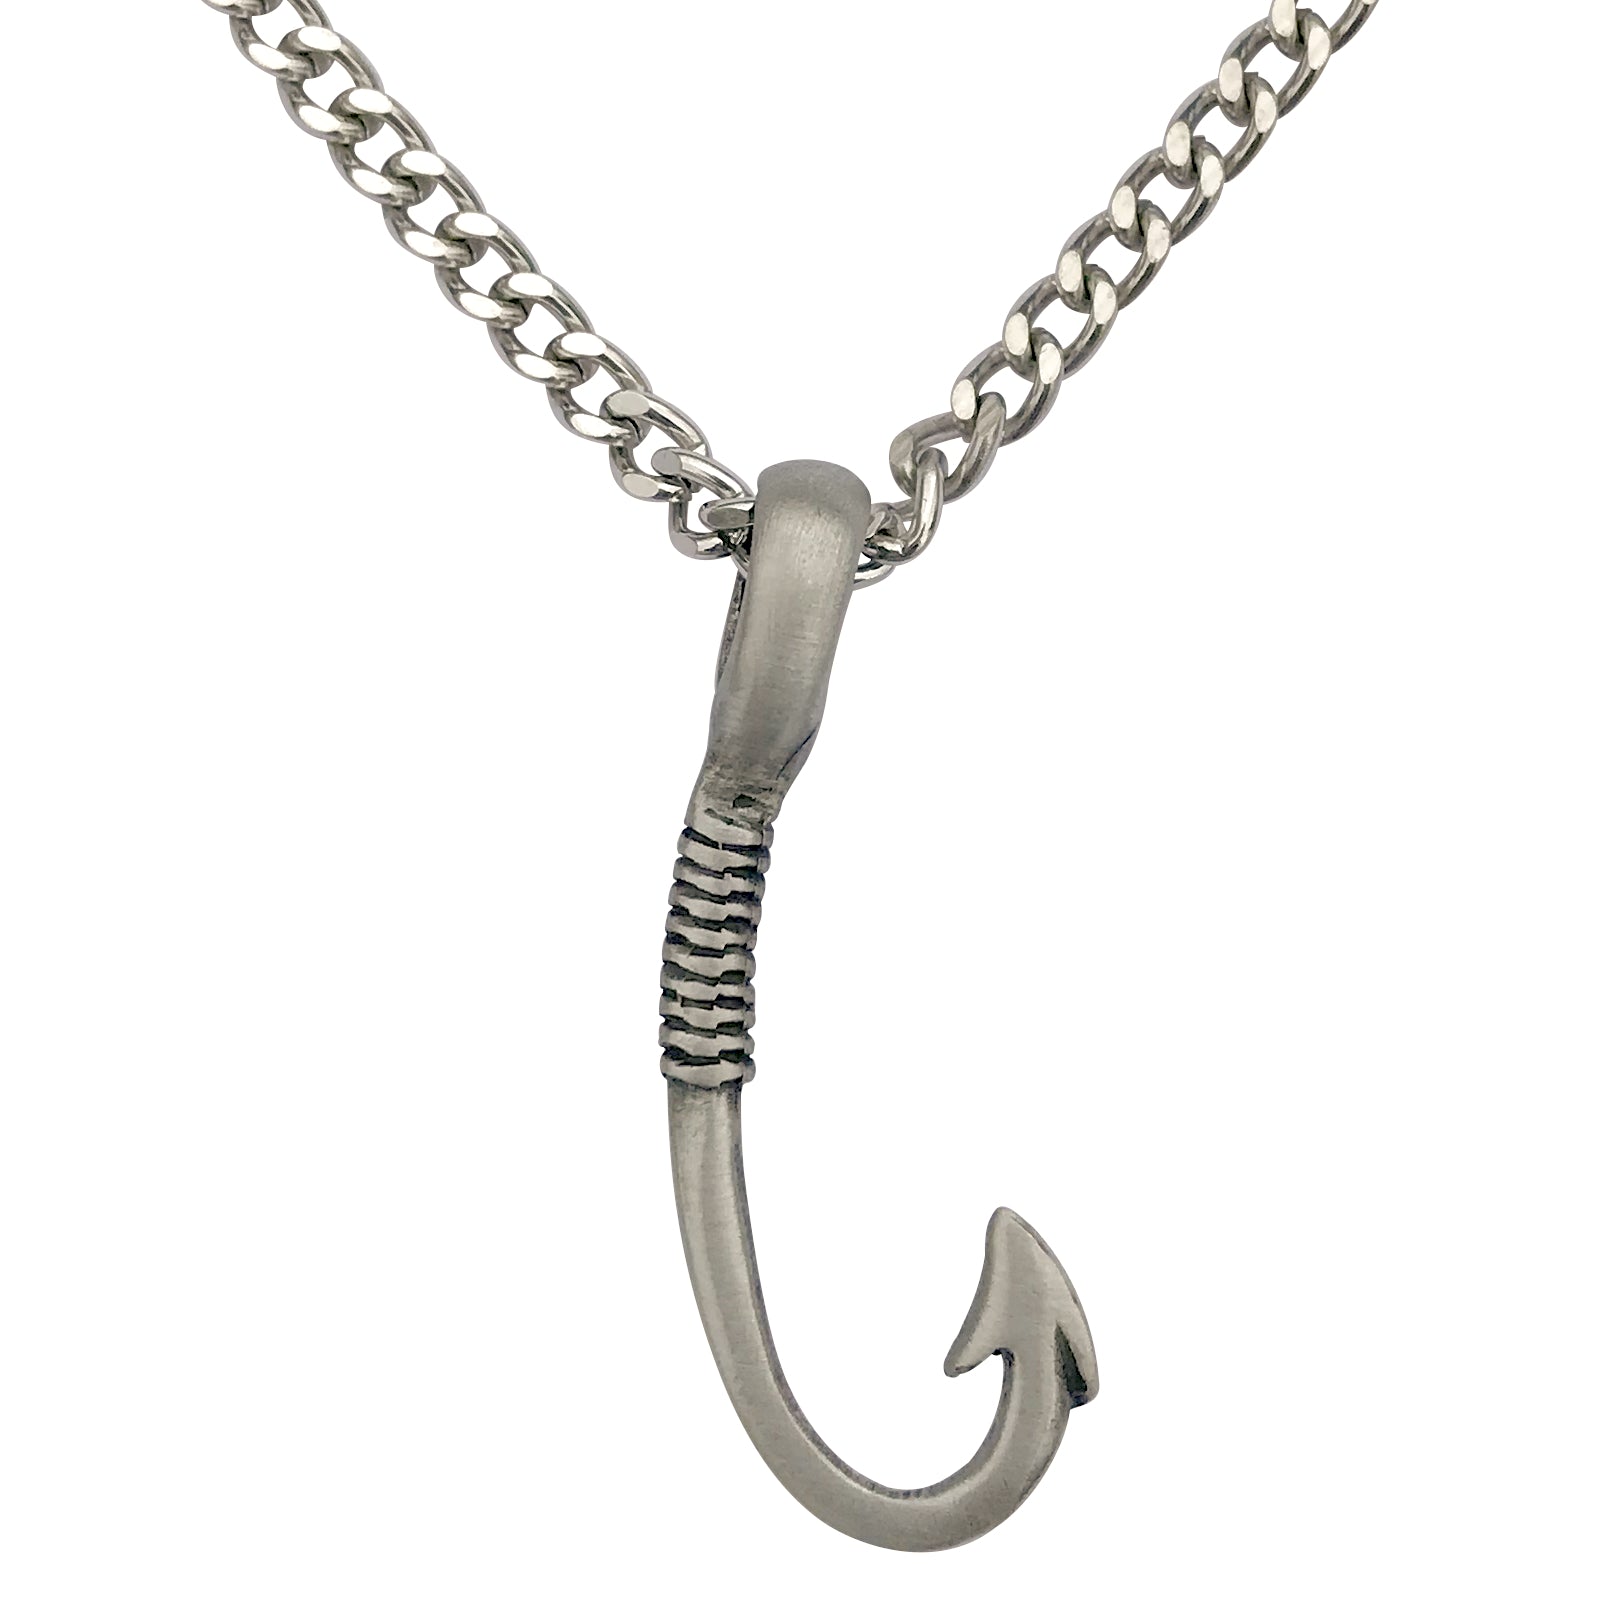 Pewter Fish Hook Fishing Pendant with Extra Large Bail, On Men's Heavy Curb Chain Necklace, 24